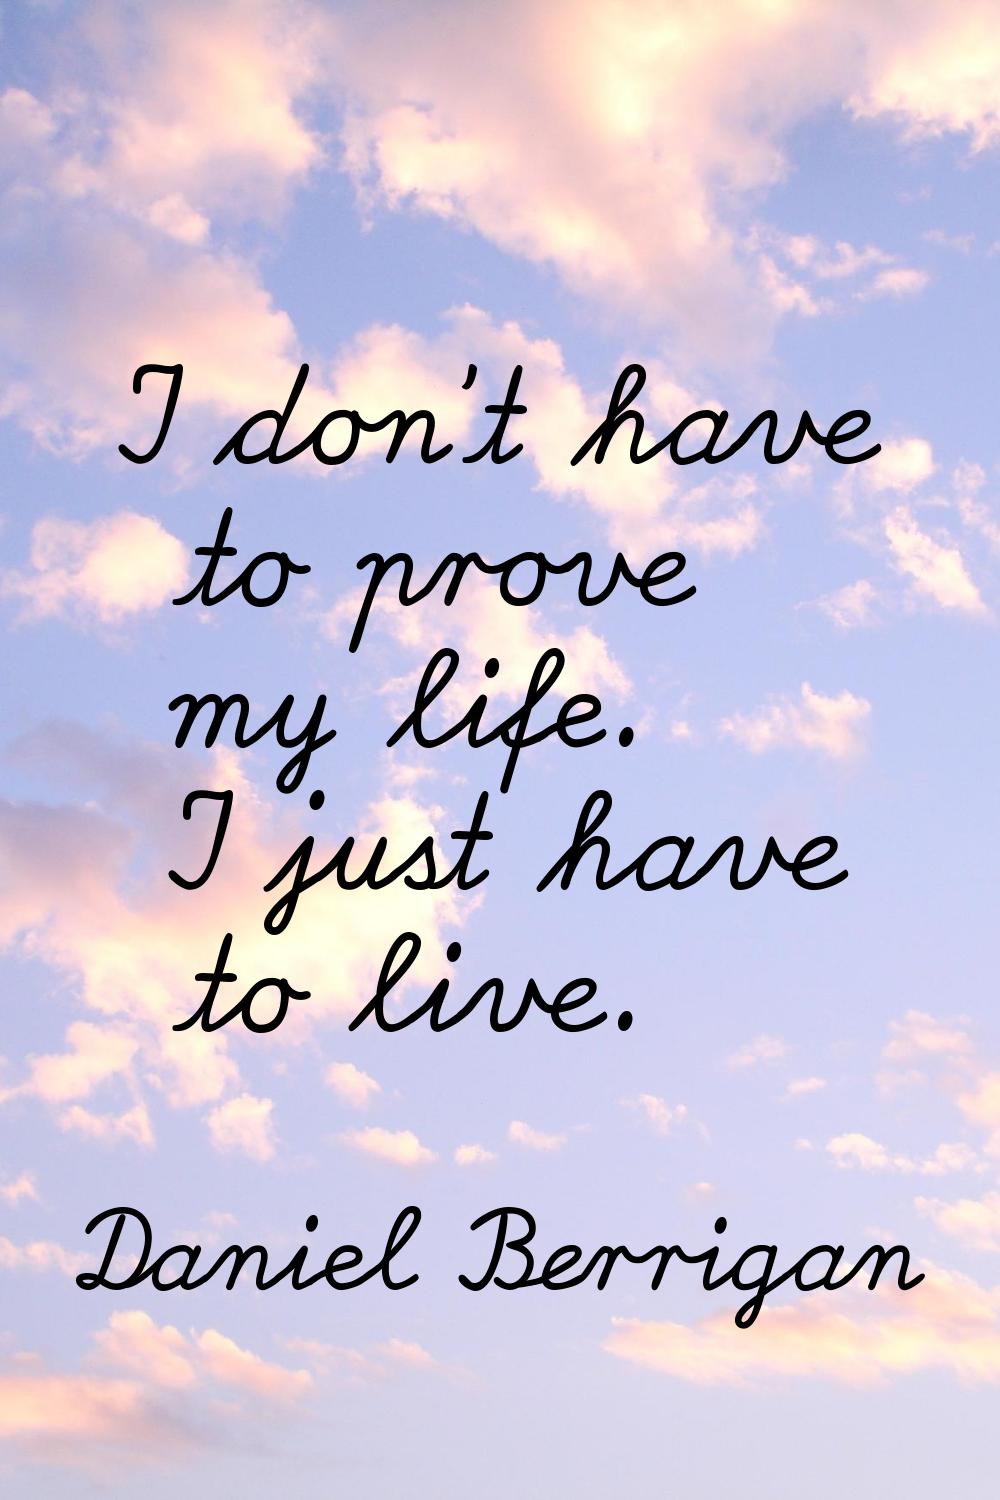 I don't have to prove my life. I just have to live.